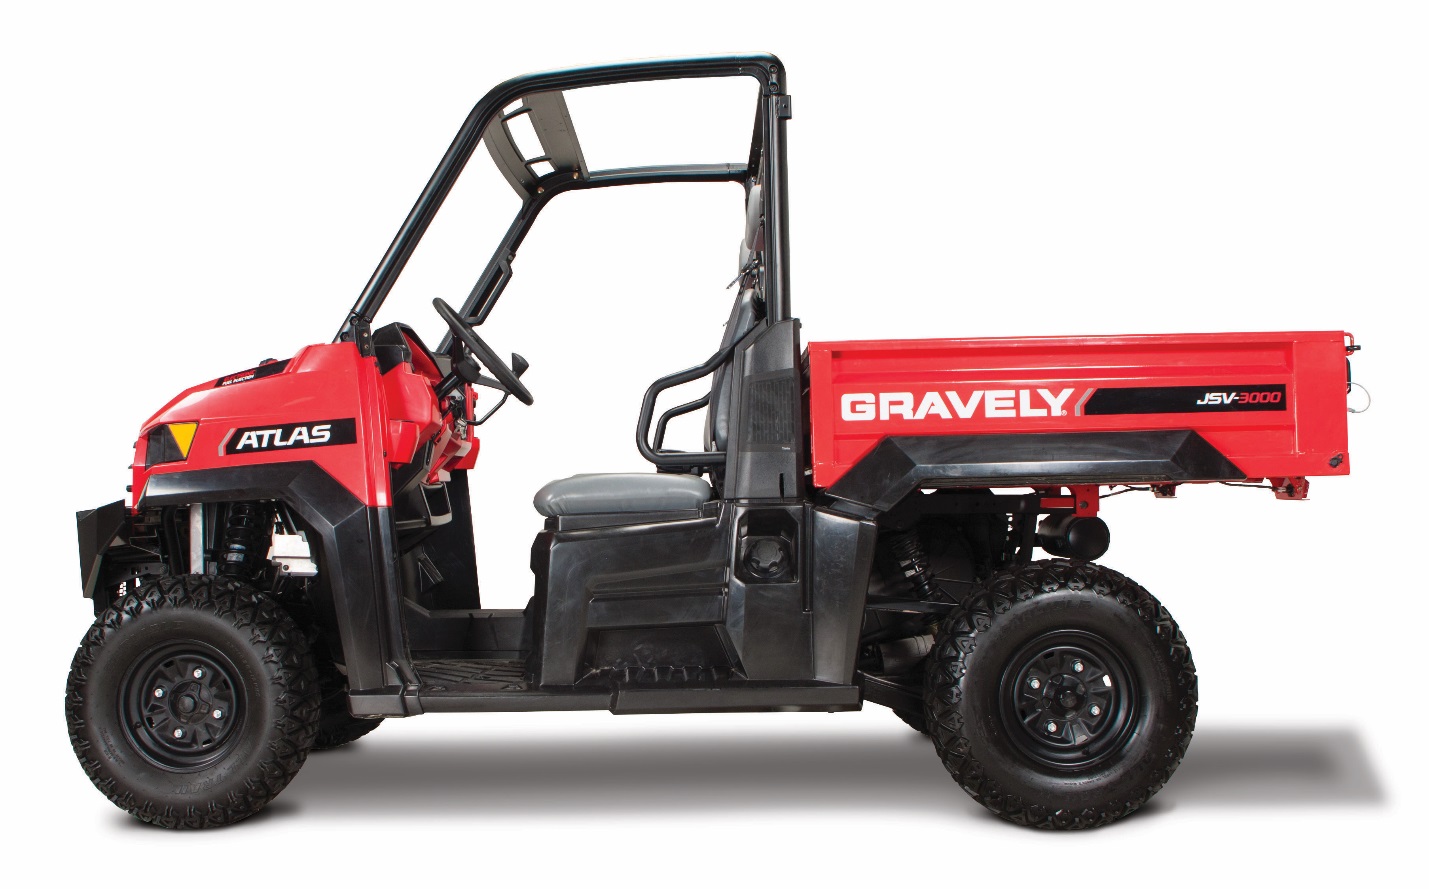 Gravely Atlas JSV 3000 and 6000 utility vehicles